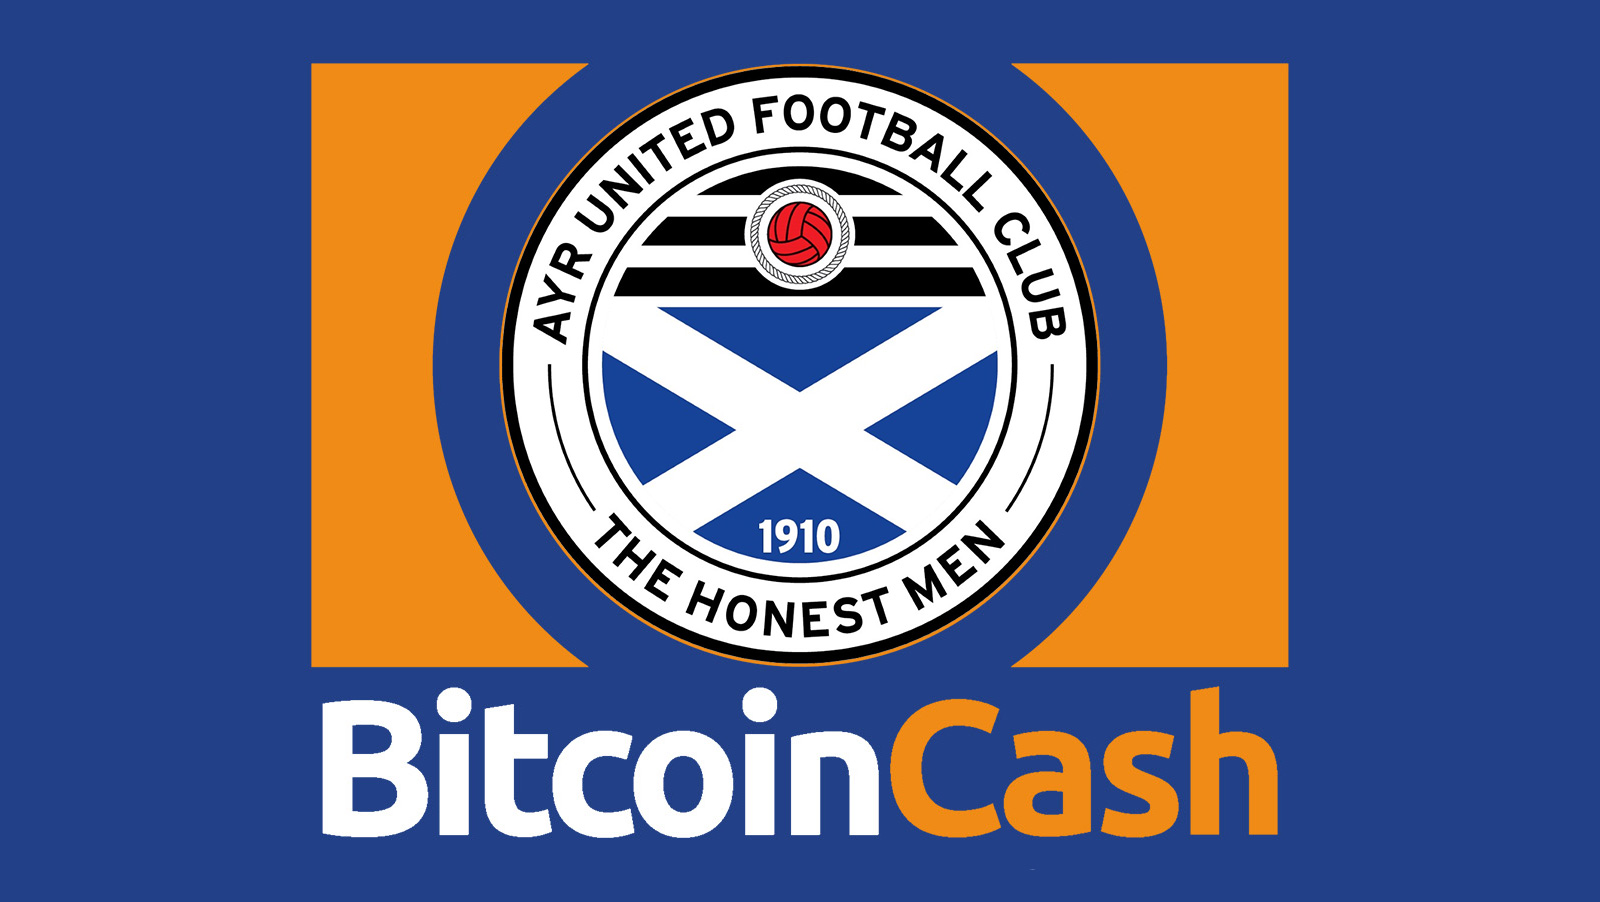 Ayr United Fc The First Football Club Shop To Offer Bitcoin Cash - 